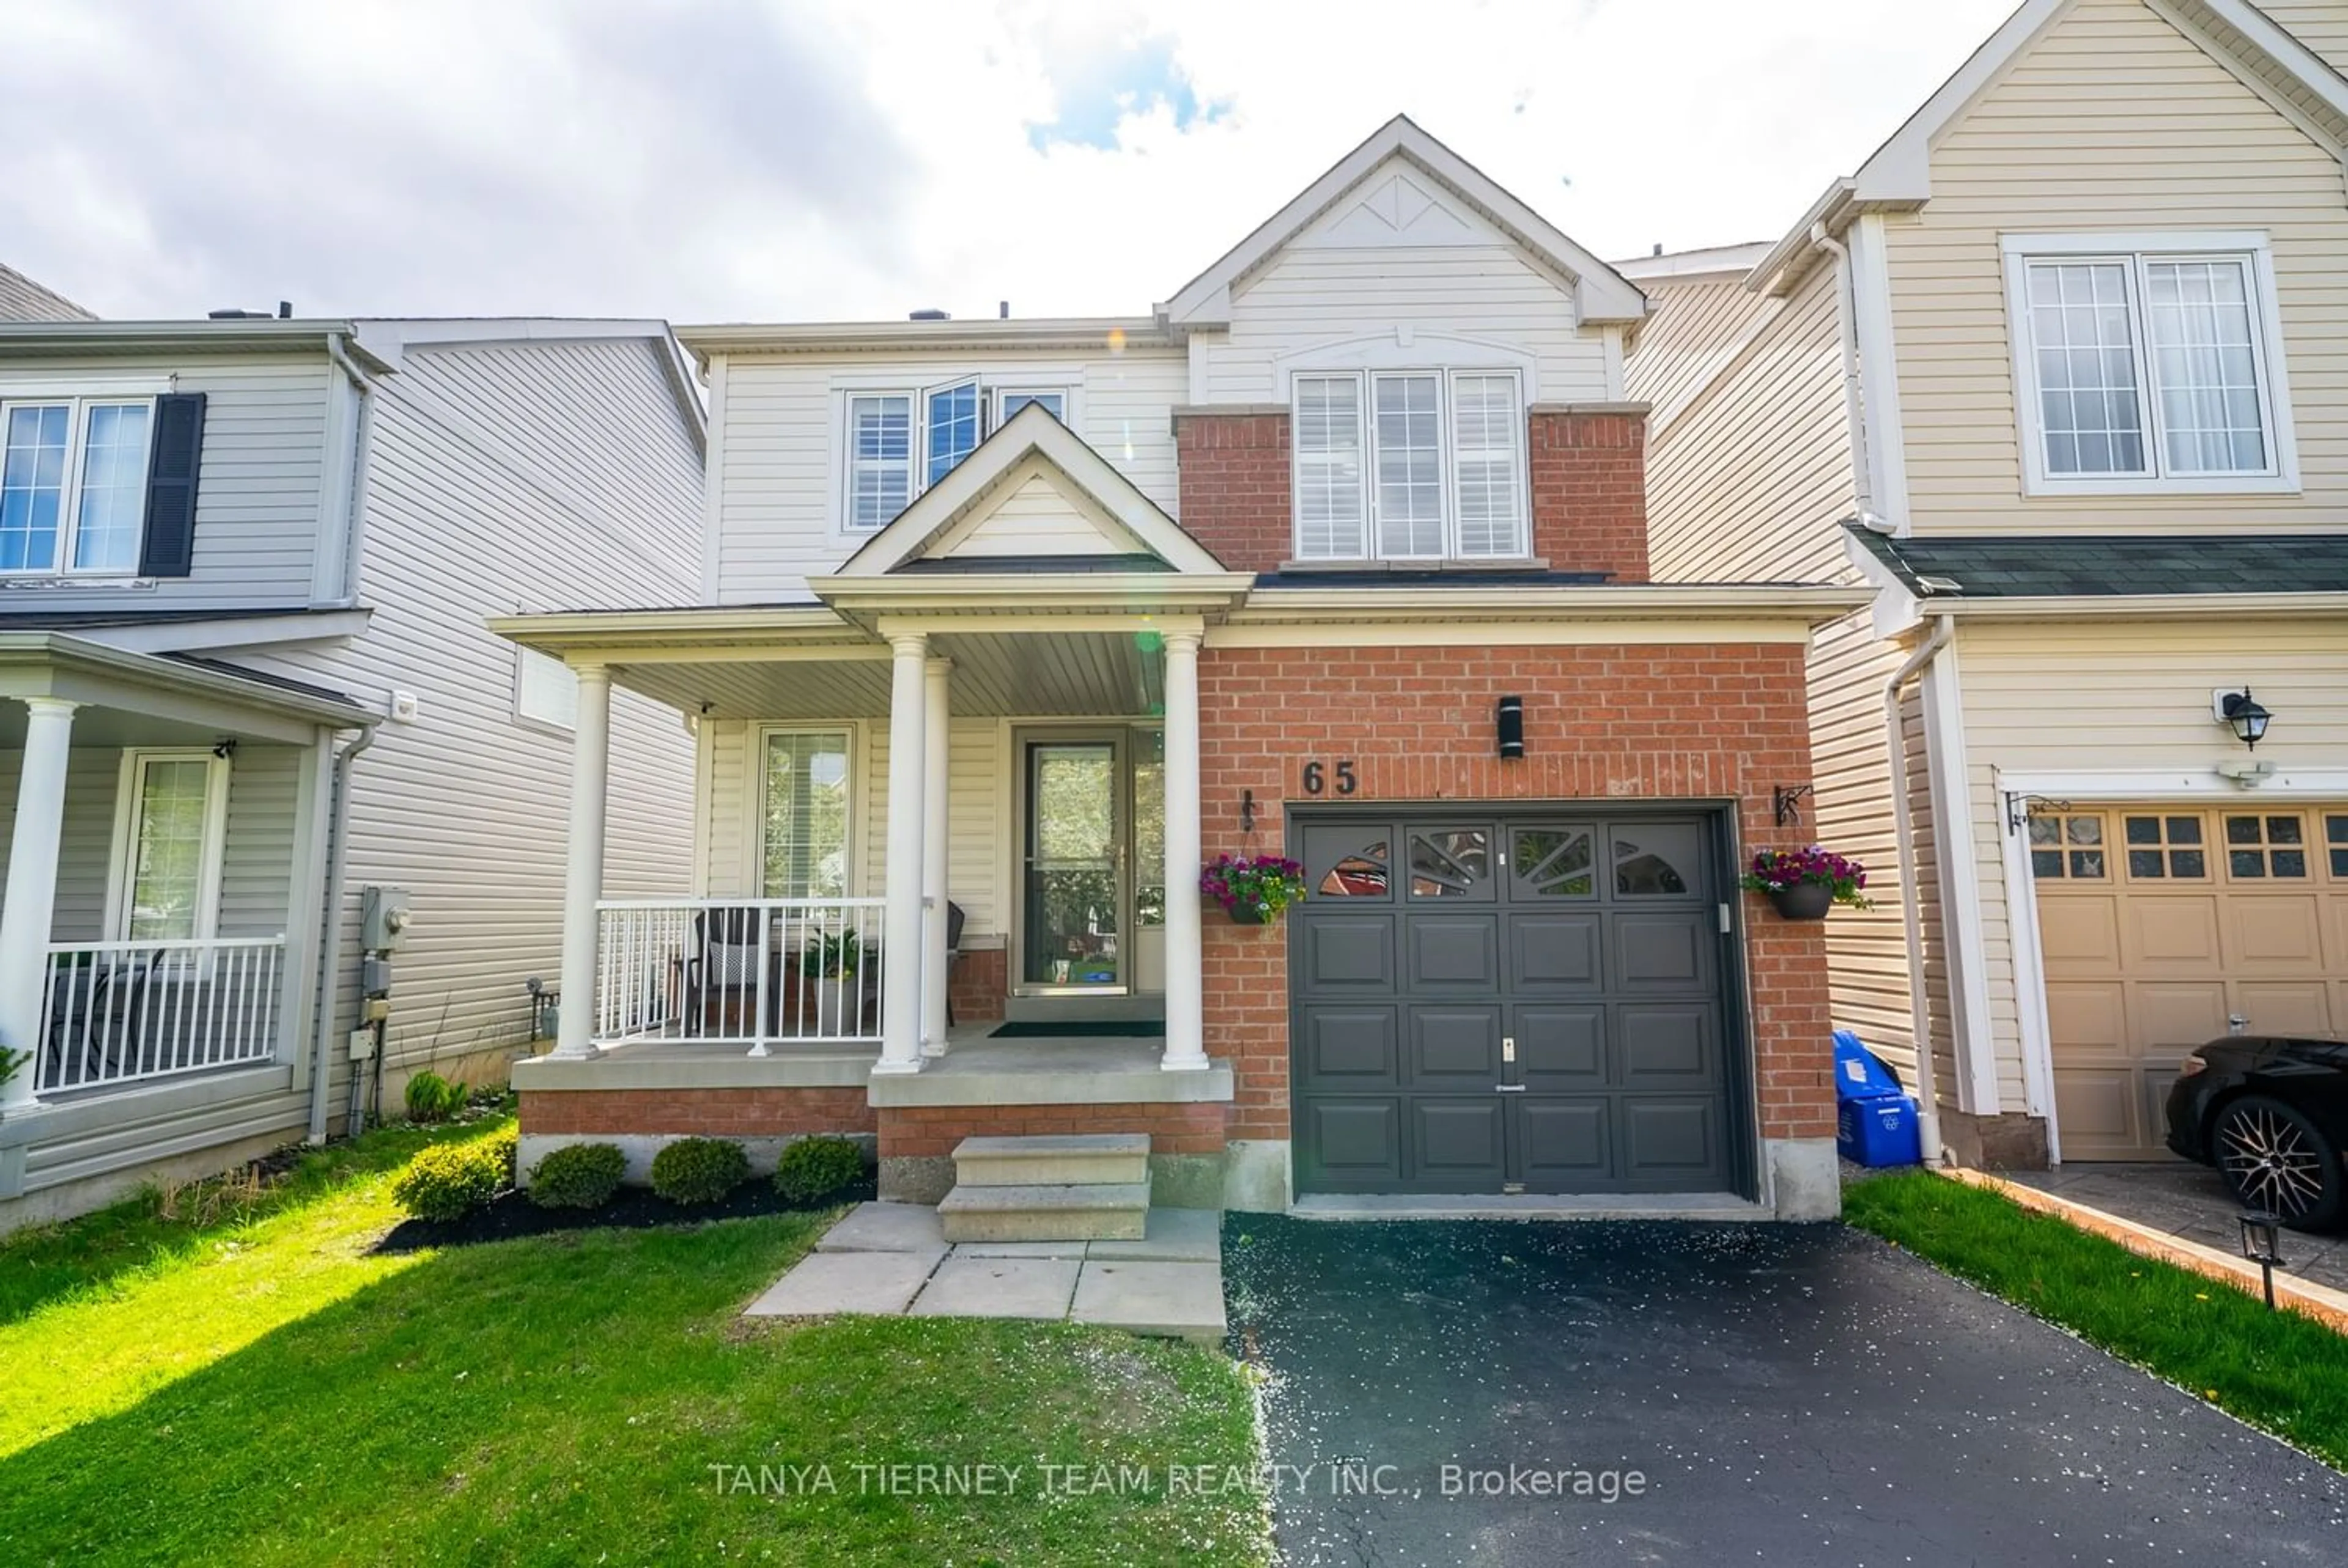 Home with brick exterior material for 65 Vanguard Dr, Whitby Ontario L1M 2P1